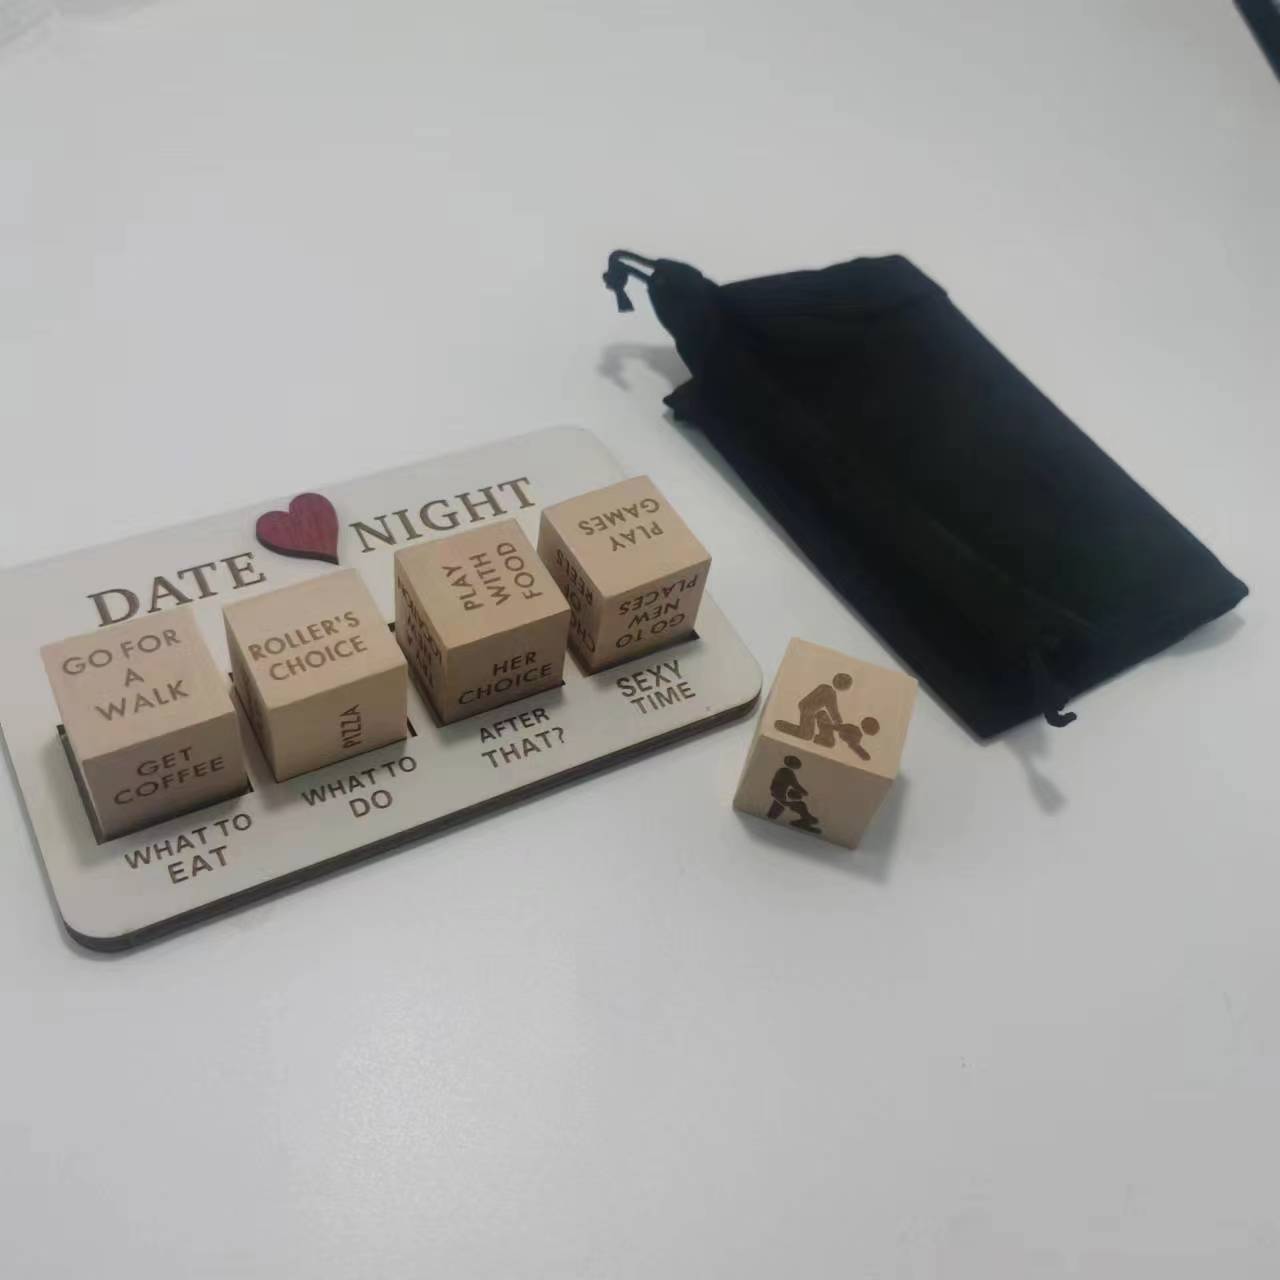 Wooden Date Night Dice Wooden Date Night Ideas Game Dice Romantic Couple Date Night Game Action Decision Dice Games For Couple